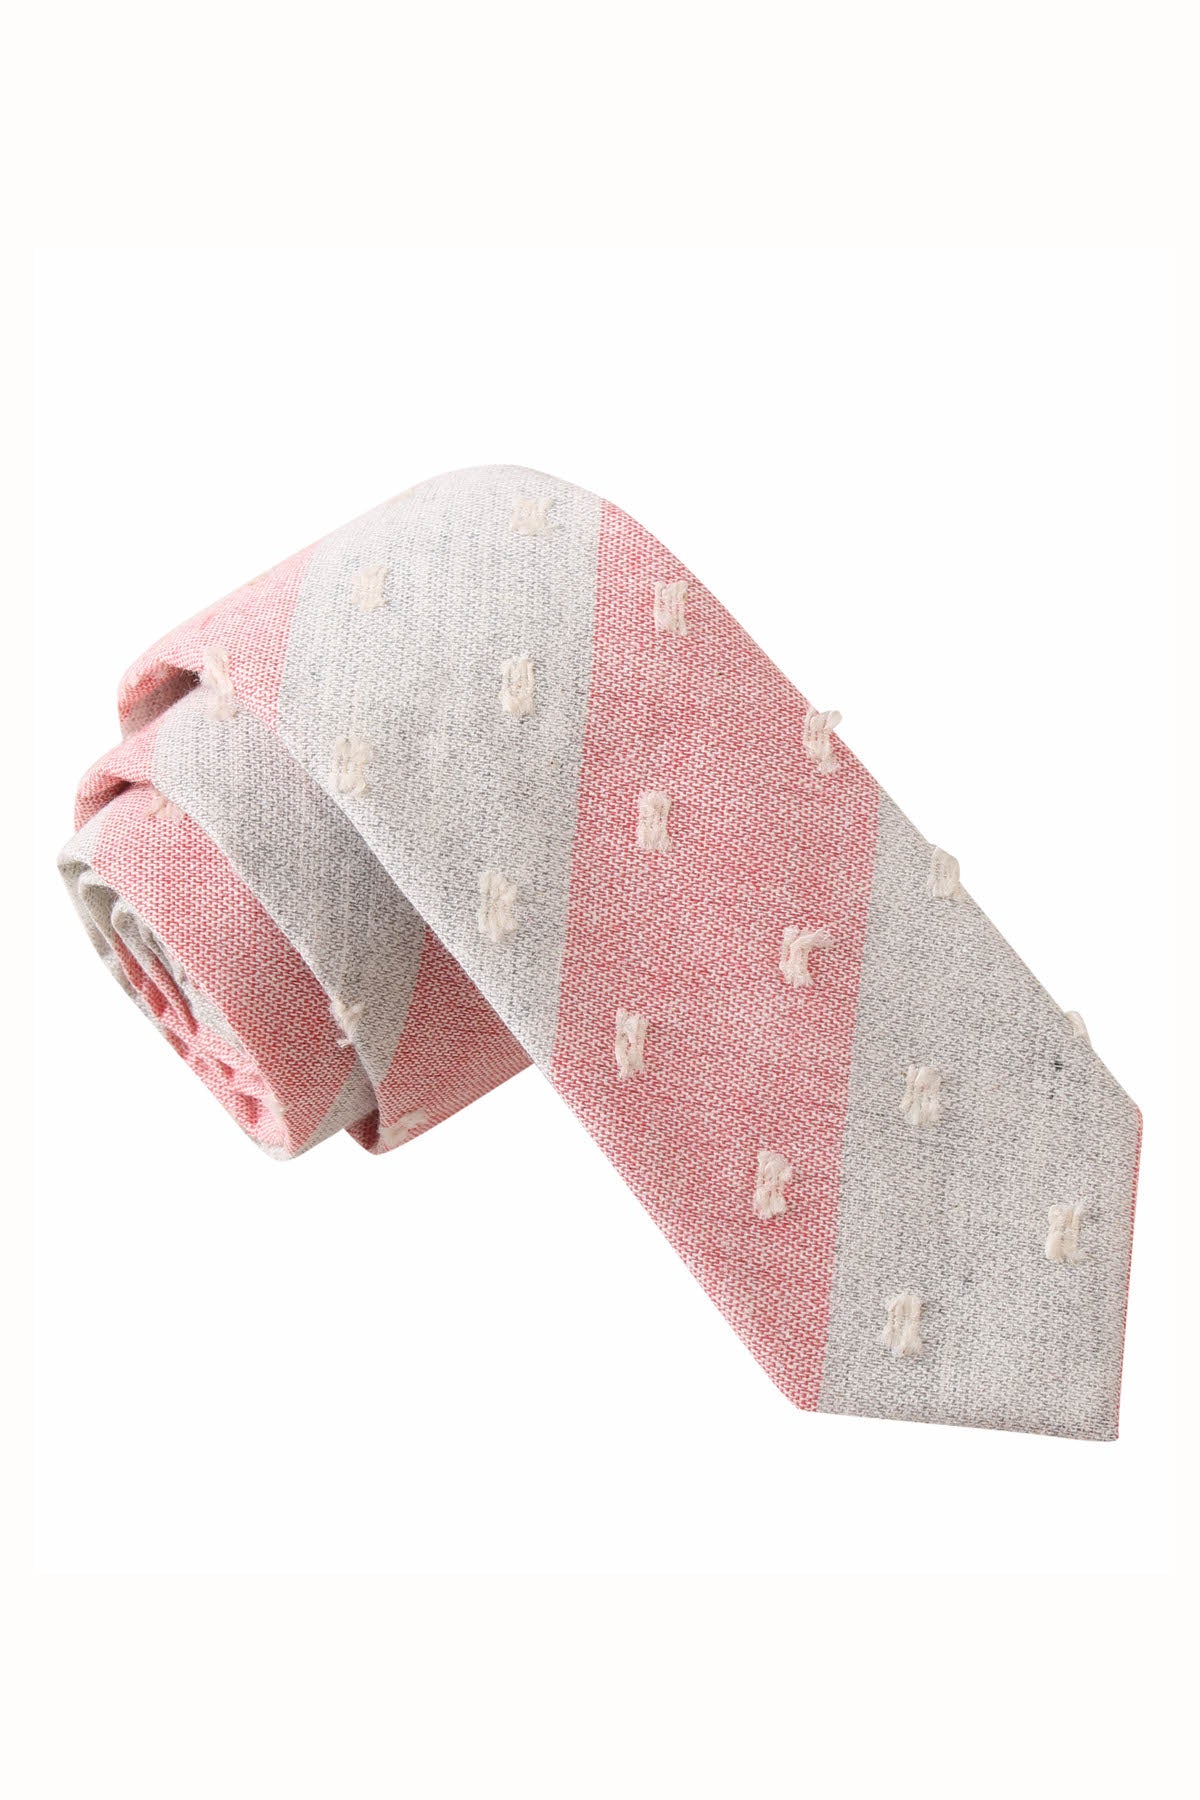 Skinny Tie Madness Pink & White Duff-Miving Tie